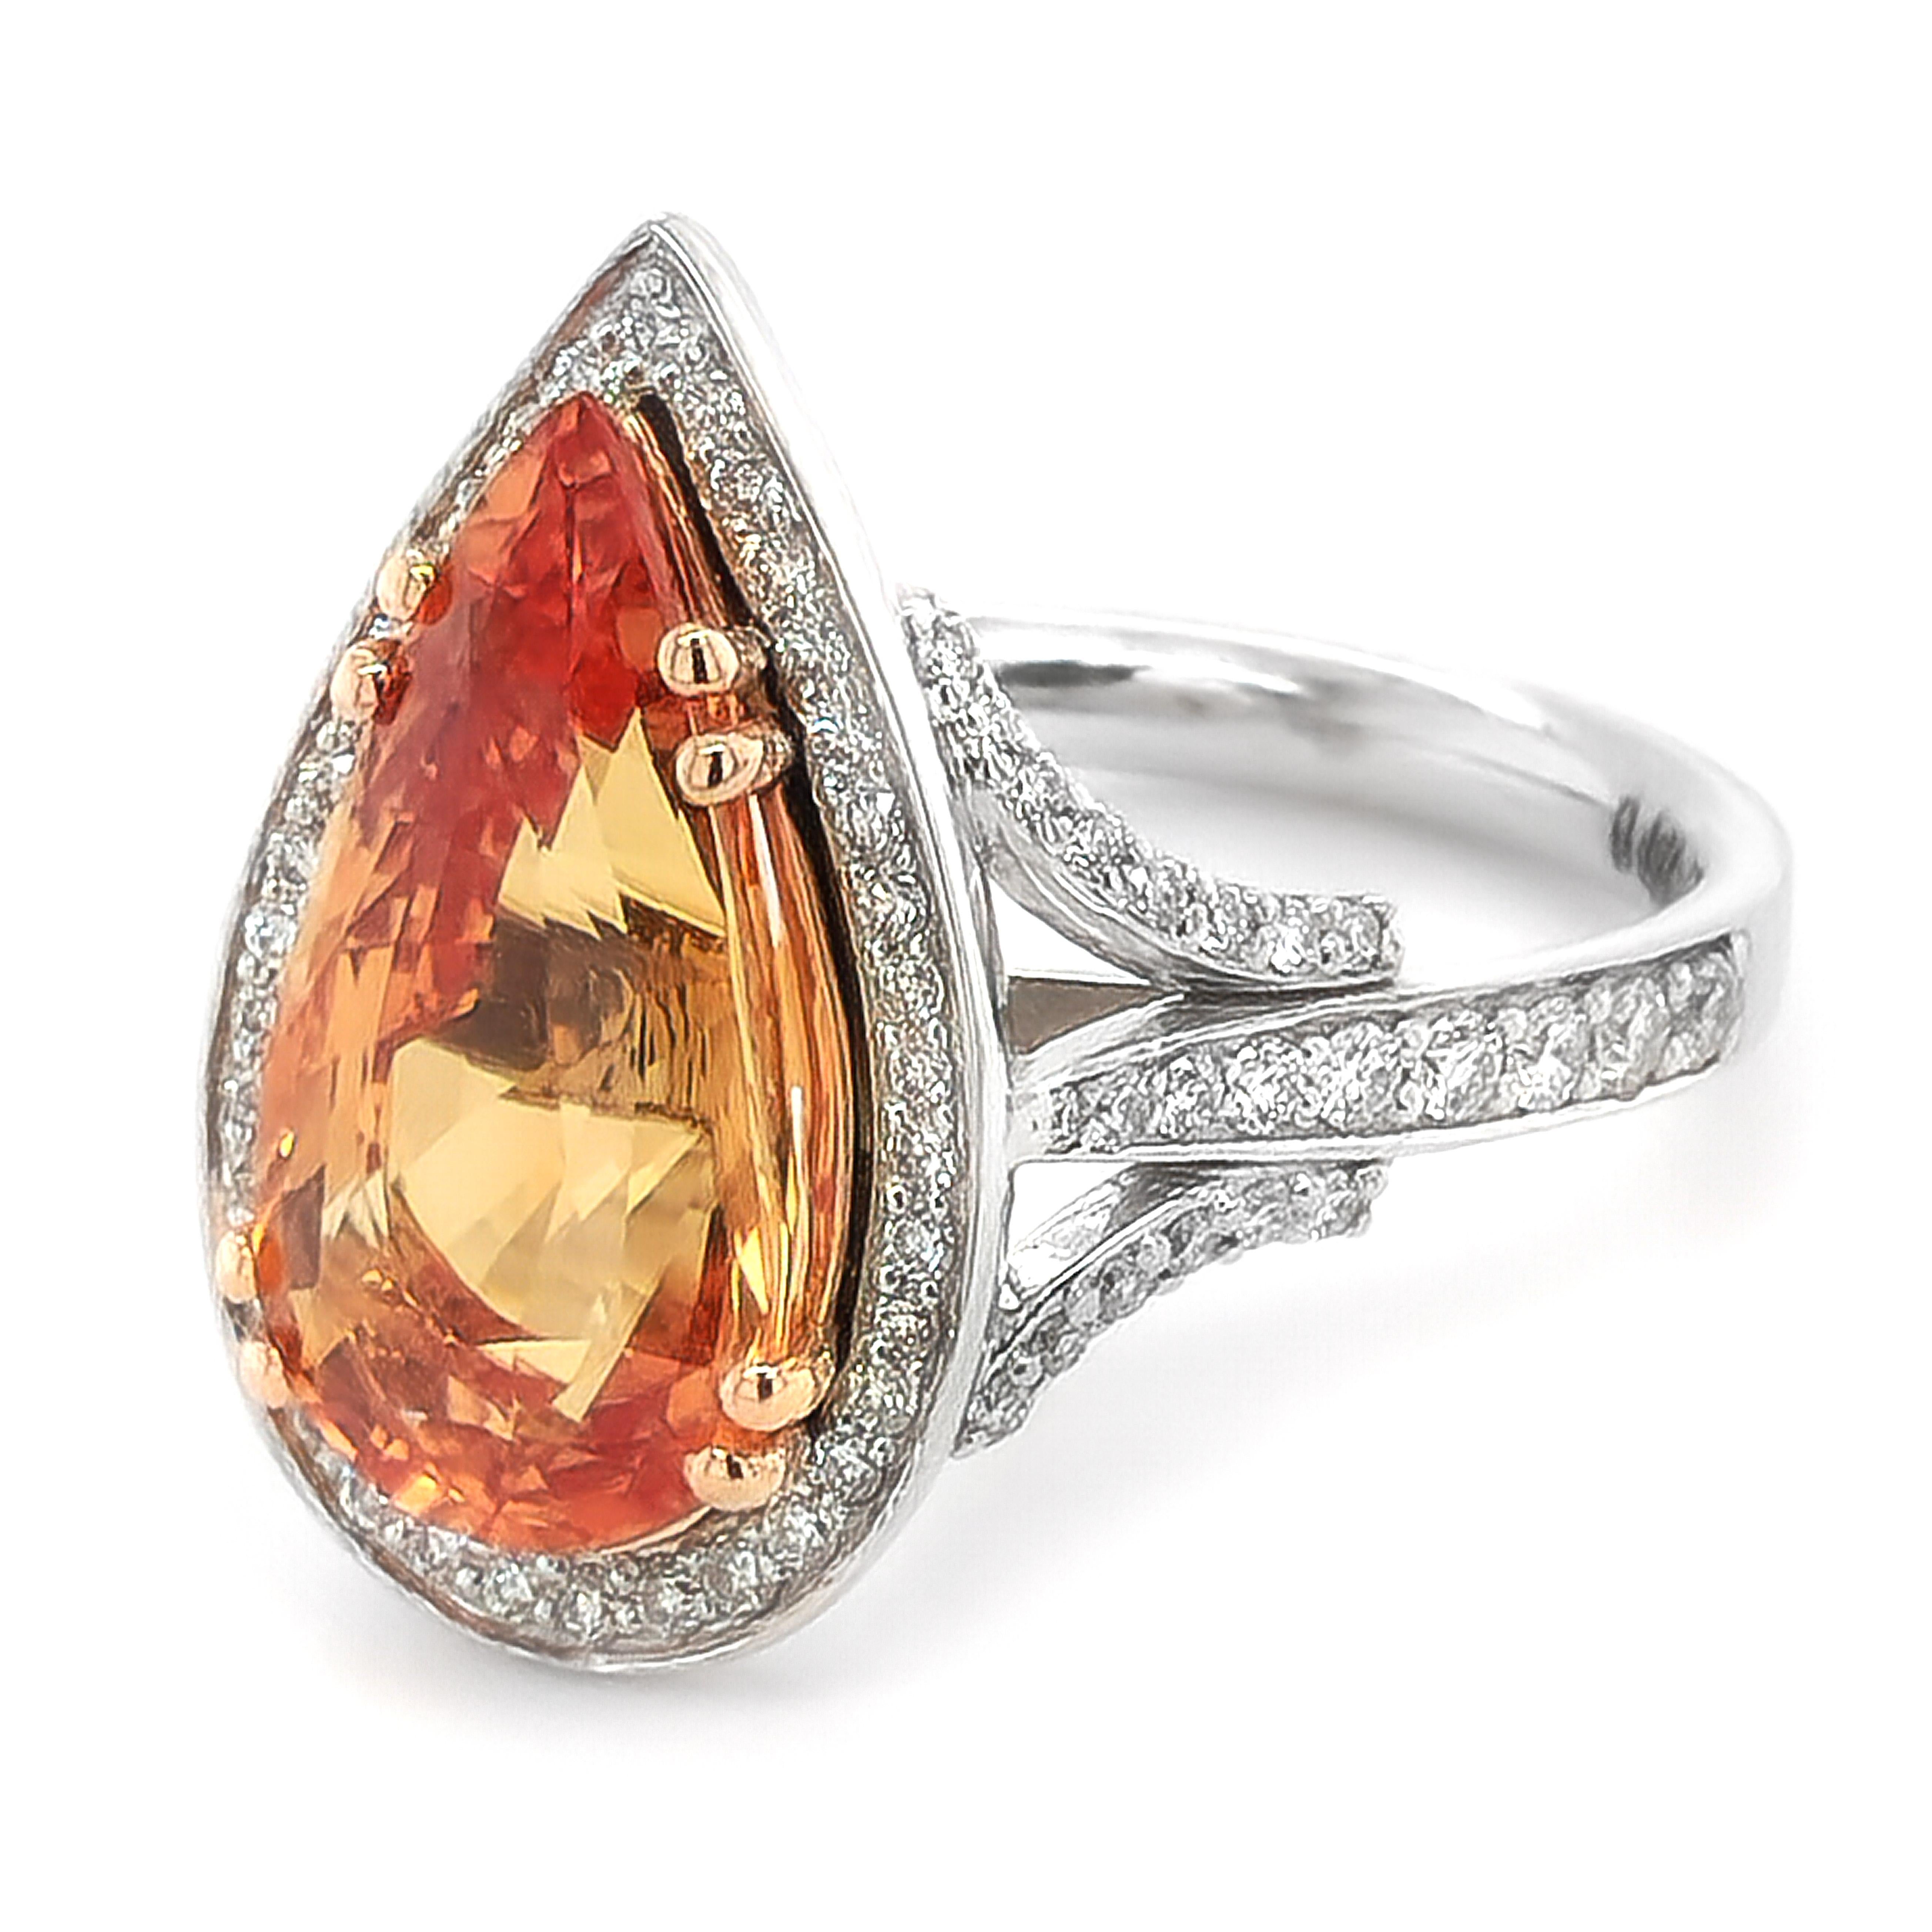 Mixed Cut GIA Certified 5.25 Carats Orange Sapphire Diamonds set in 18K White Gold Ring For Sale